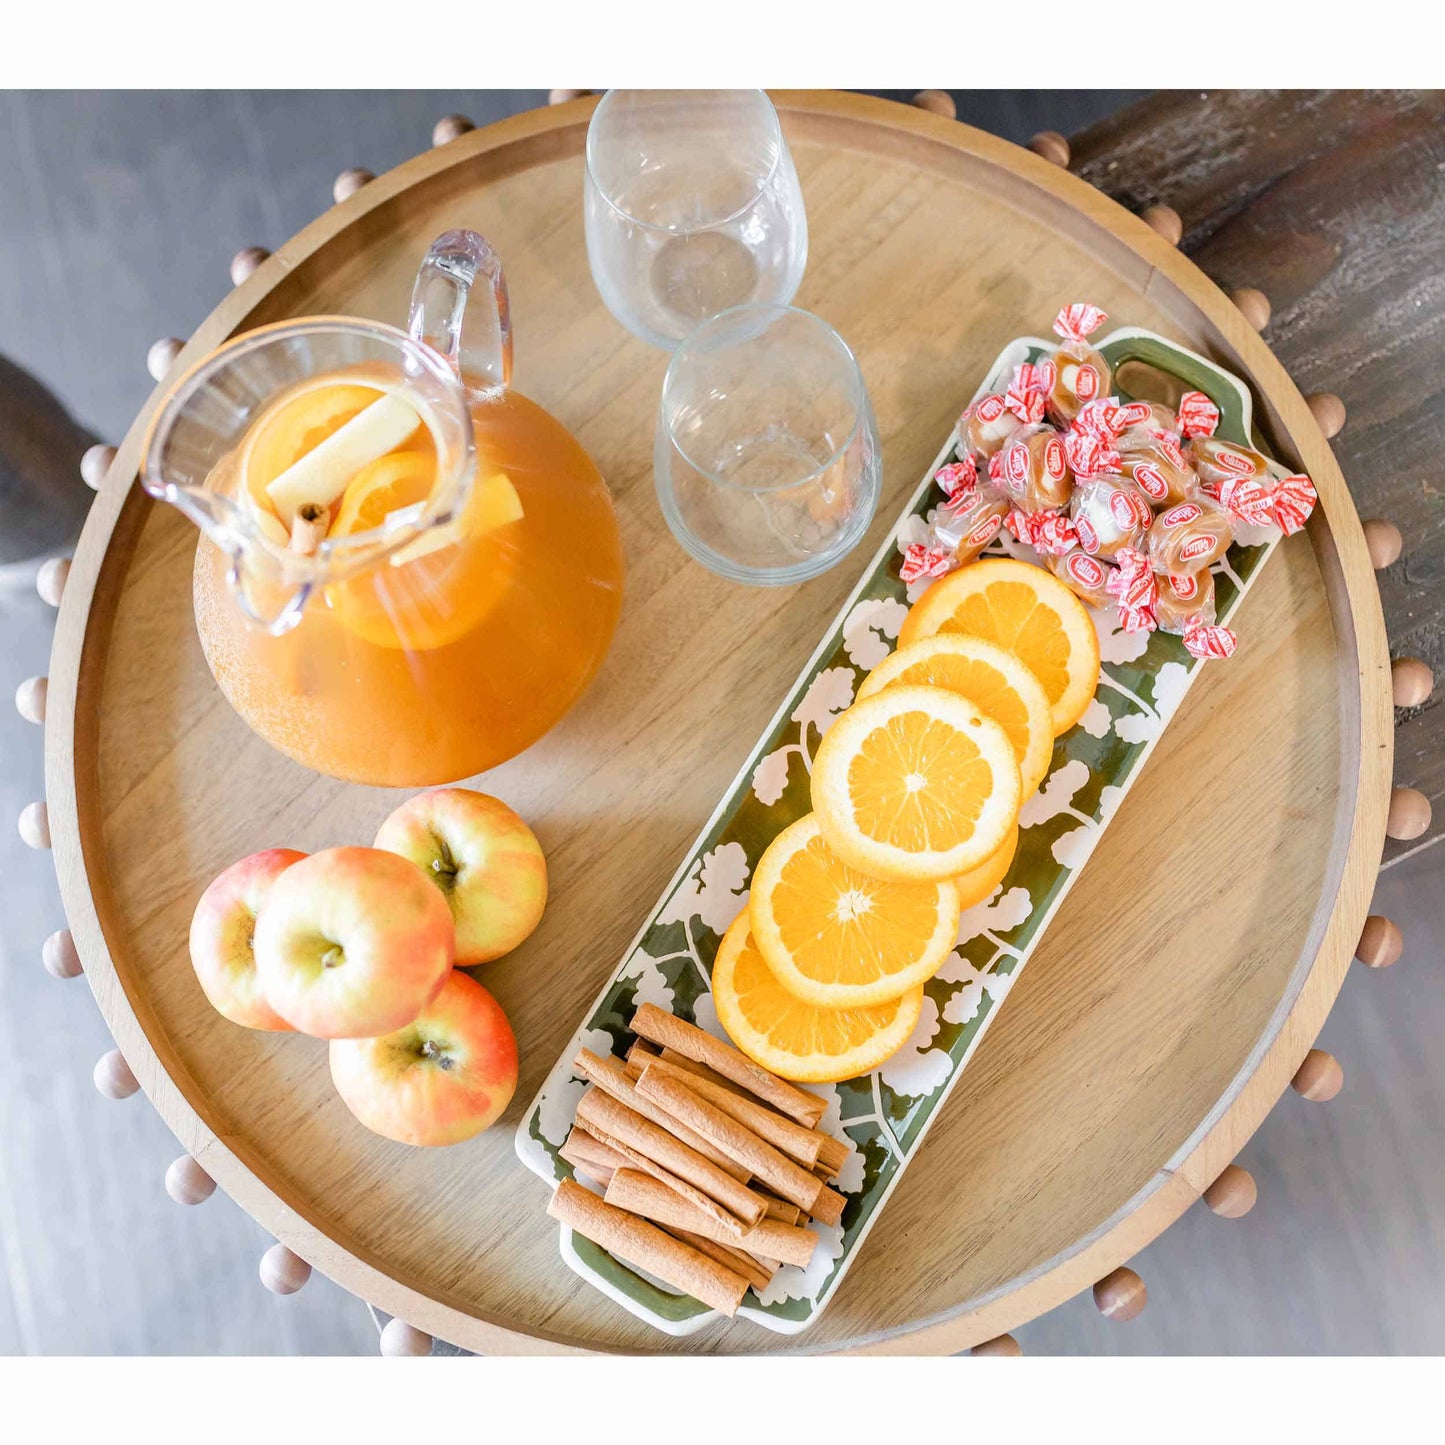 top view of round wooden tray on a table with a pitcher, glasses, apples and snacks arranged on it.